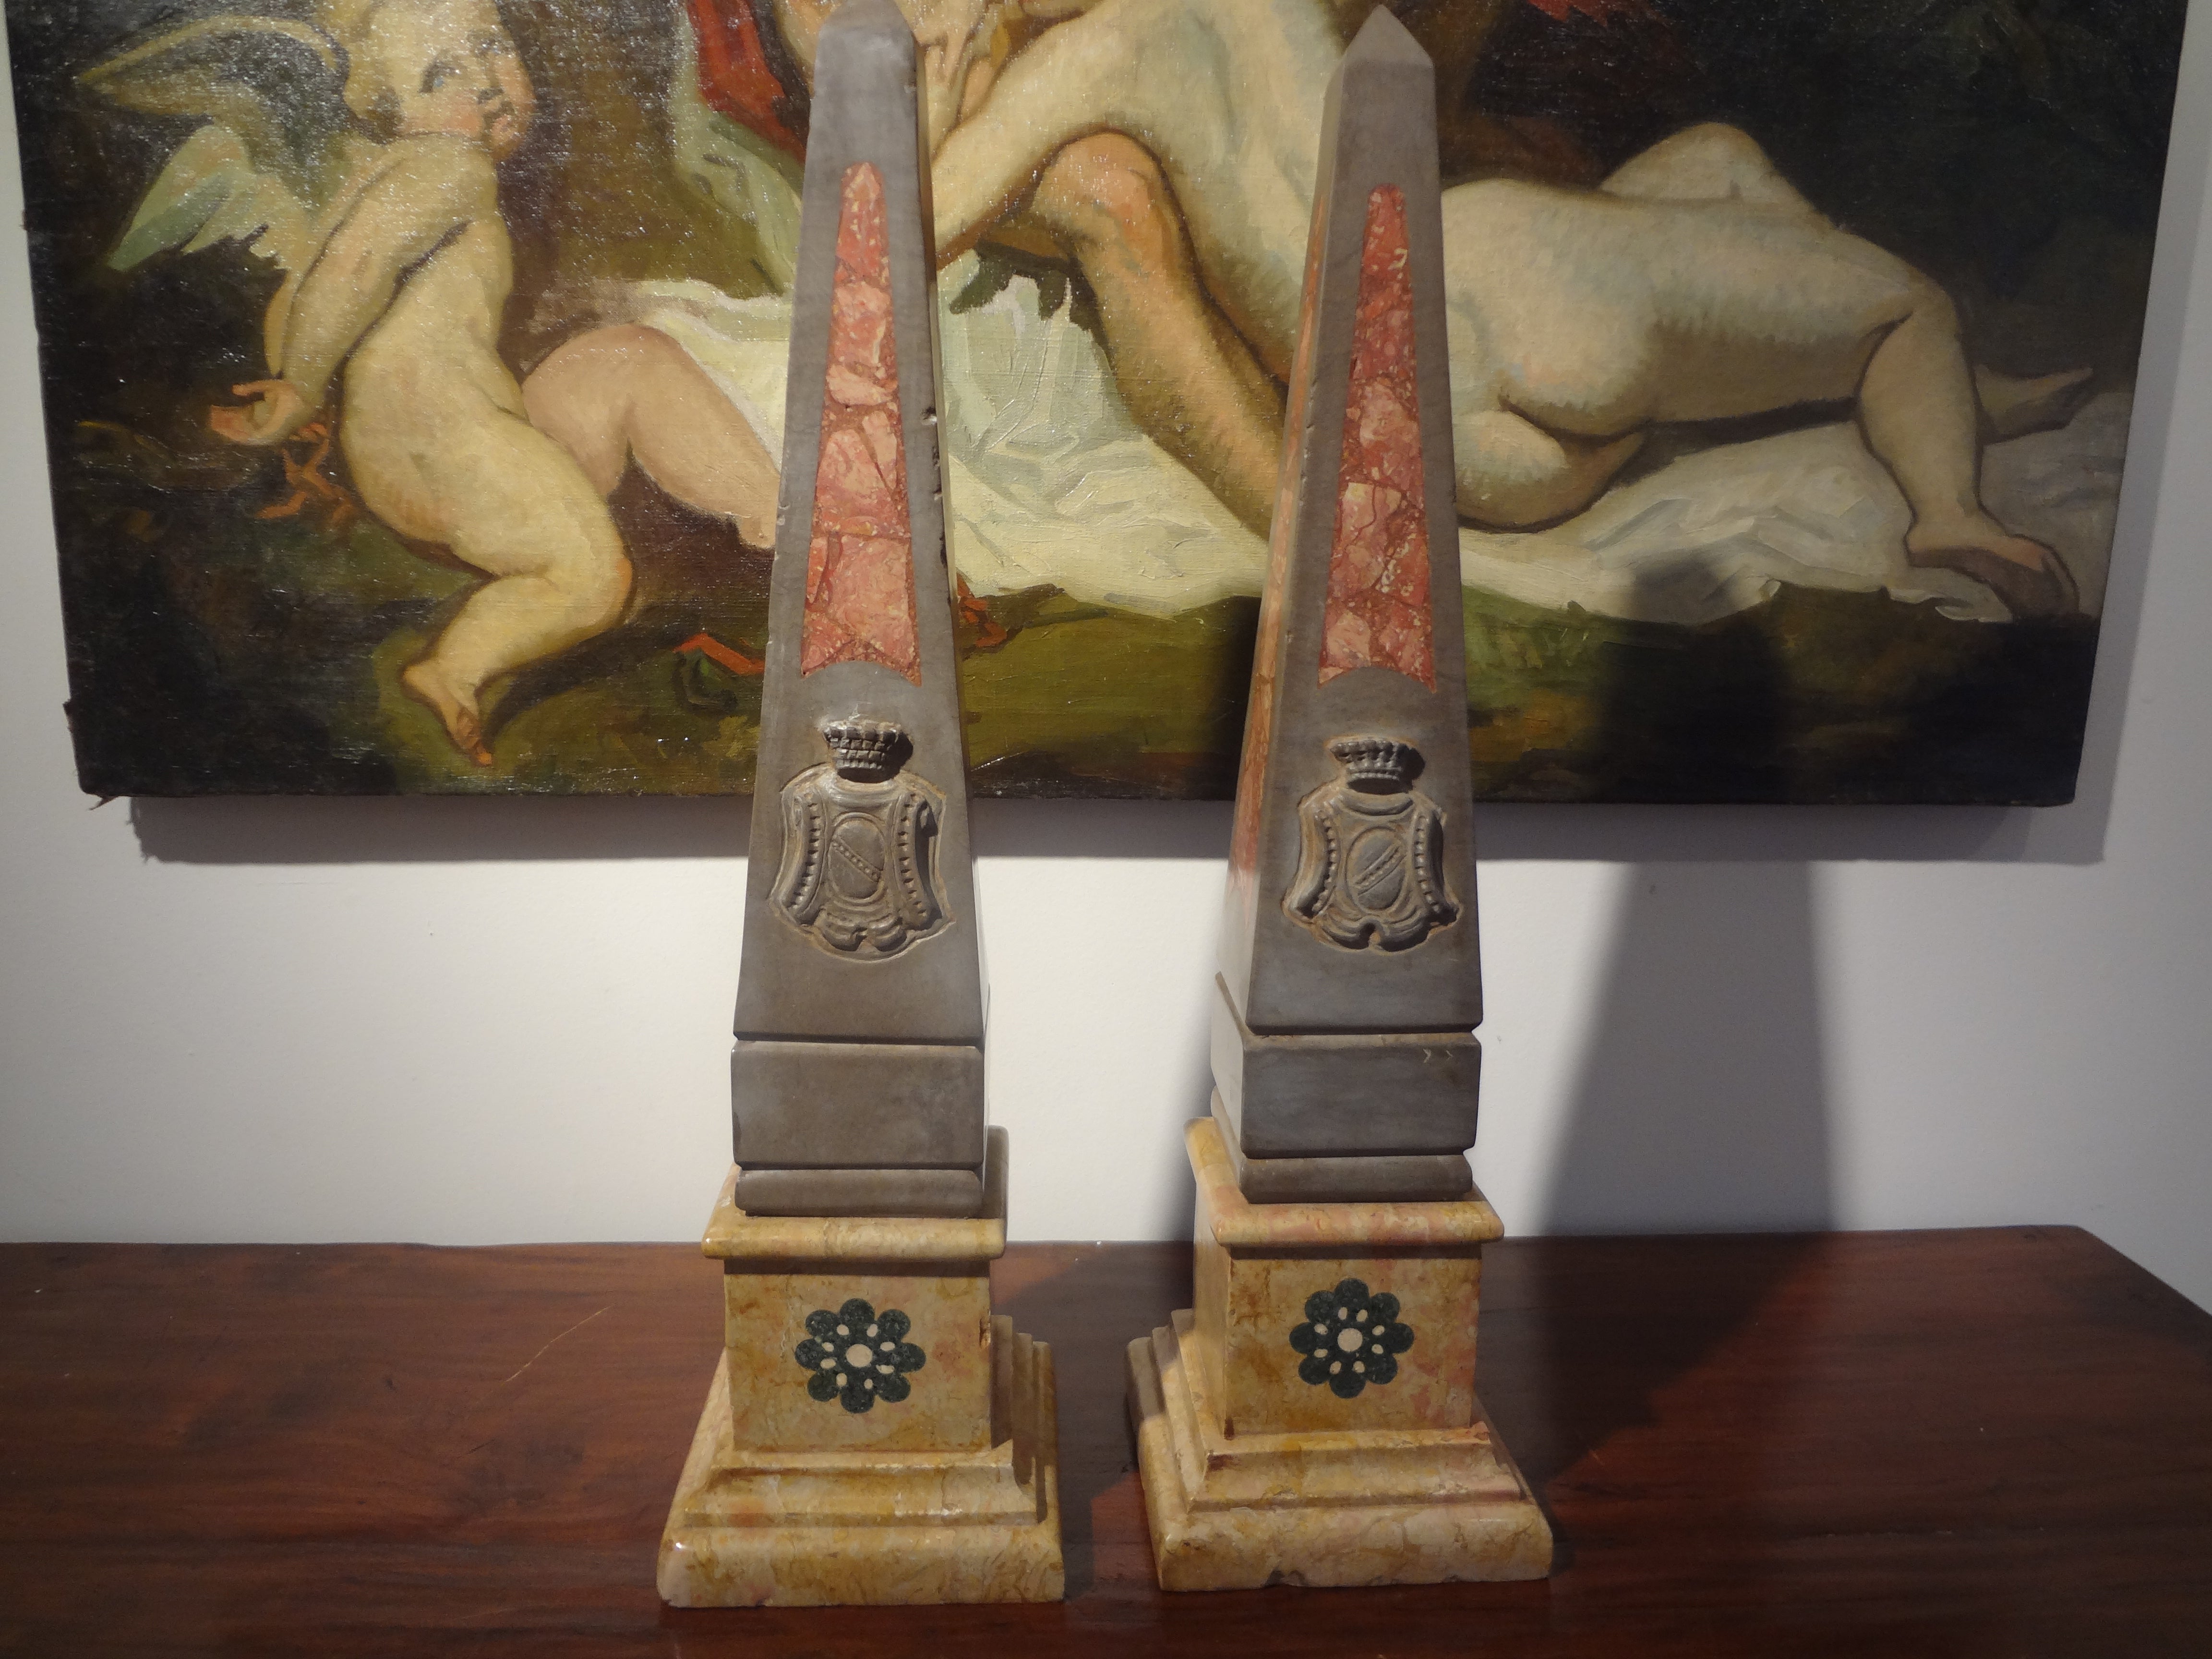 Pair of 19th century Italian Neoclassical style marble obelisks.
Classic pair of Antique Italian marble obelisks with a crest. These Italian Neoclassical style marble obelisks would look great on a console, commode, credenza, cocktail table,